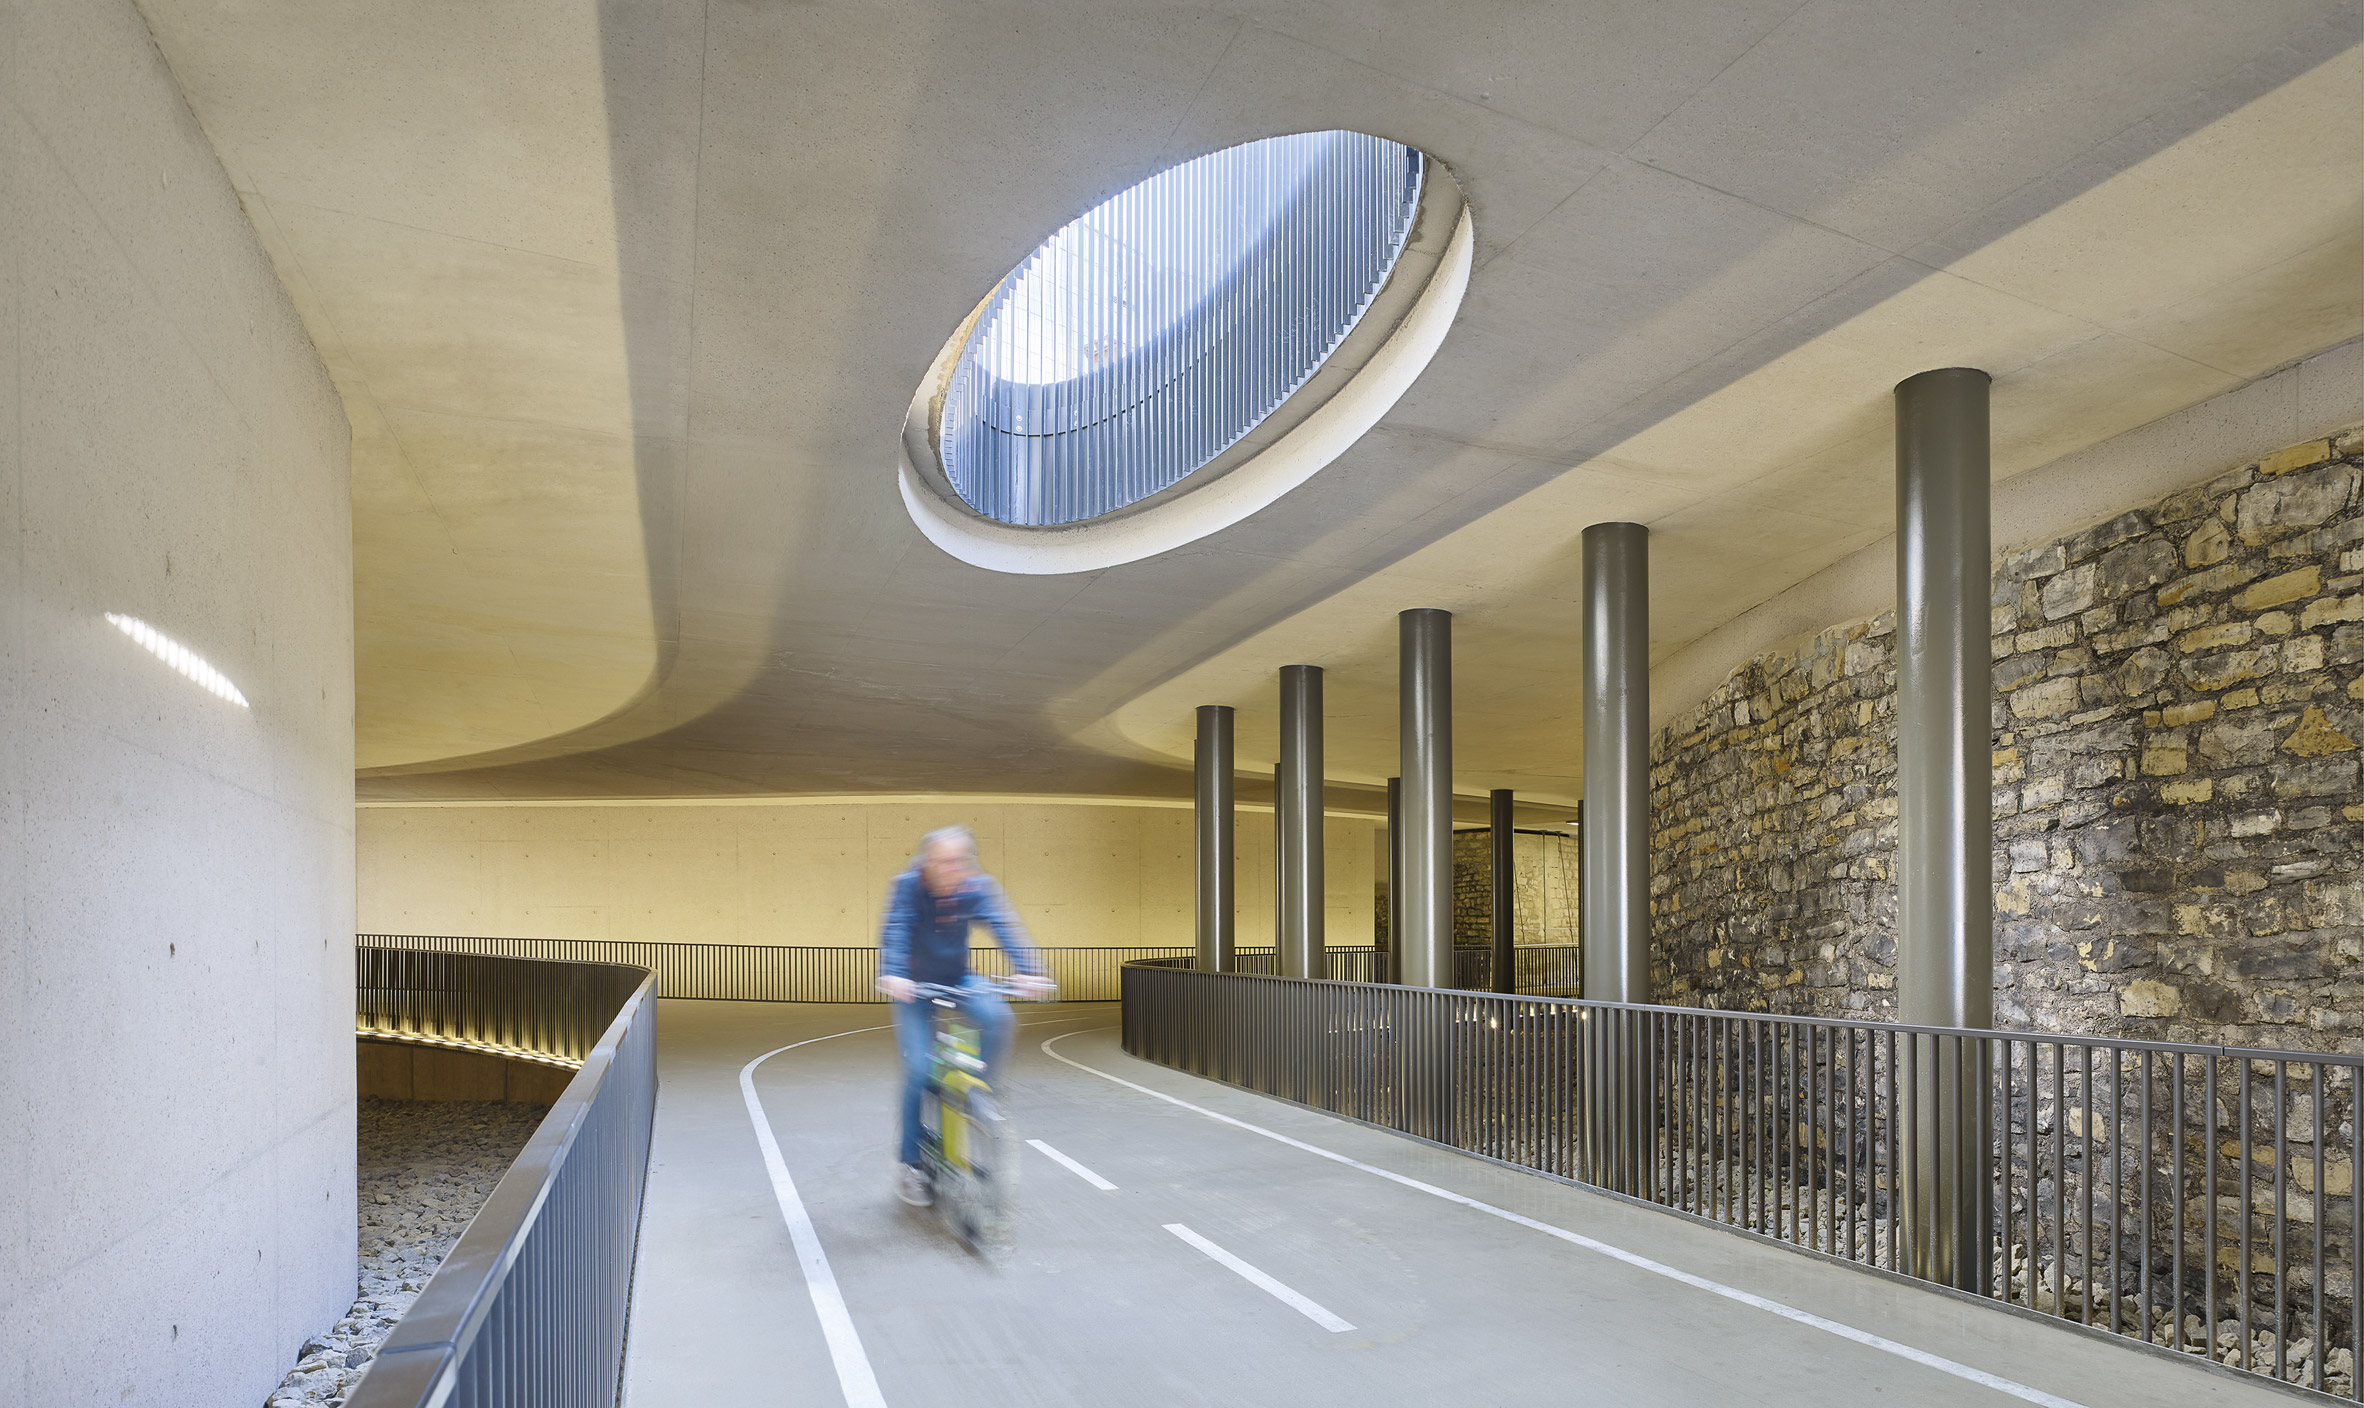 Passerelle Pont Adolphe by CBA Architects